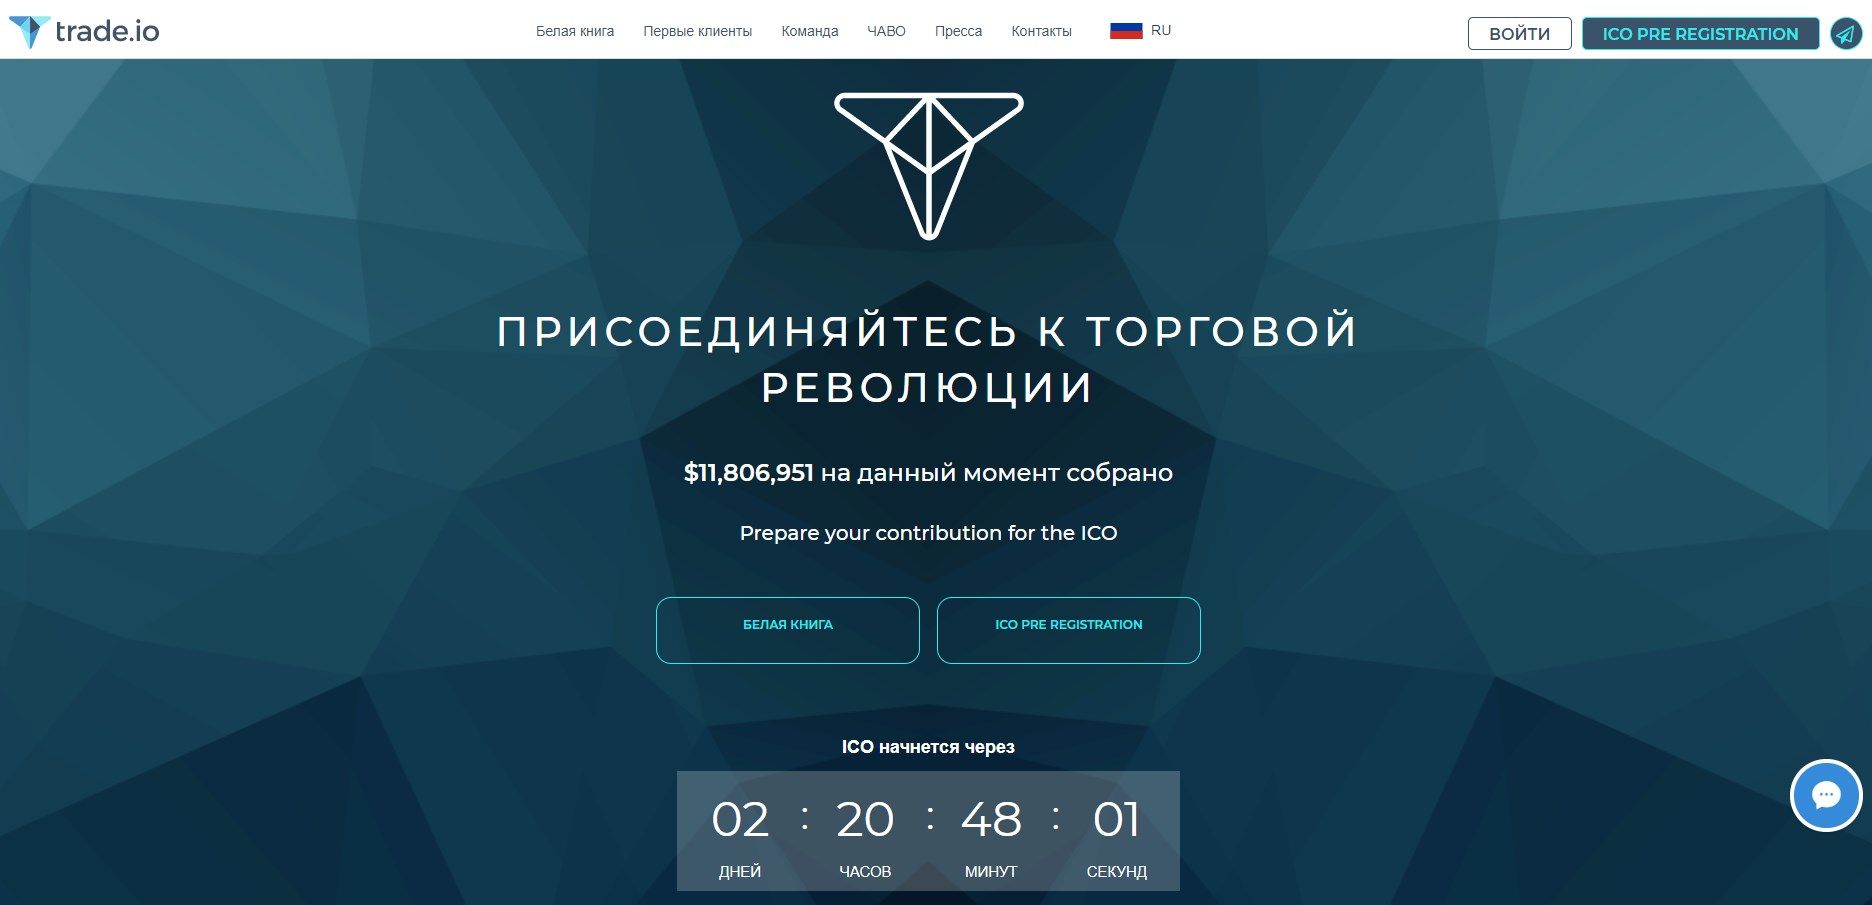 How to participate in Trade.io ICO? Step 1: Register on the website